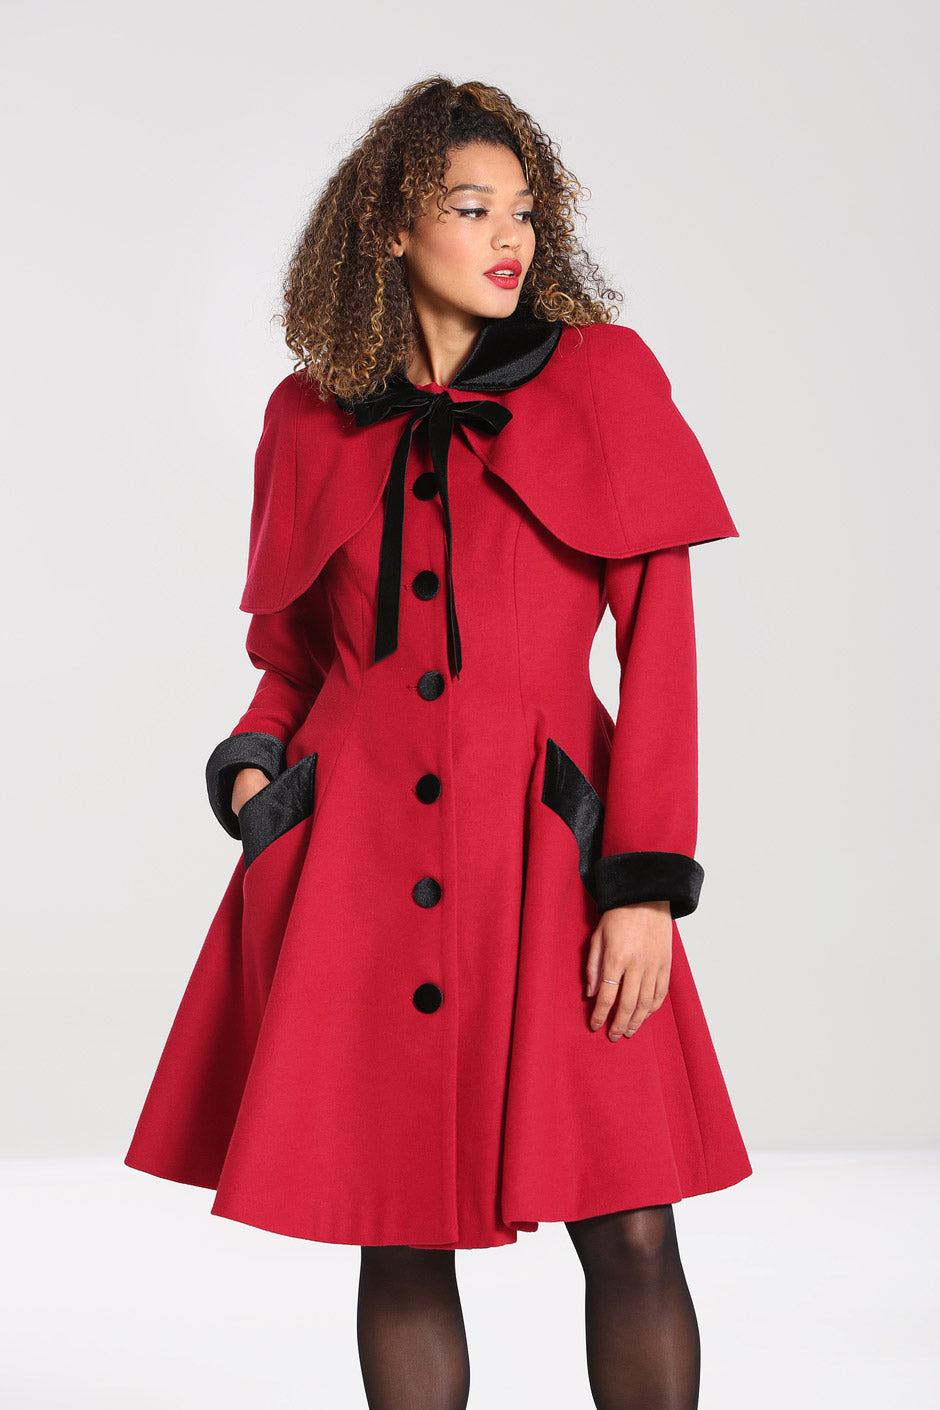 woman wearing vintage makeup with curly hair wearing a red and black 40s style coat 